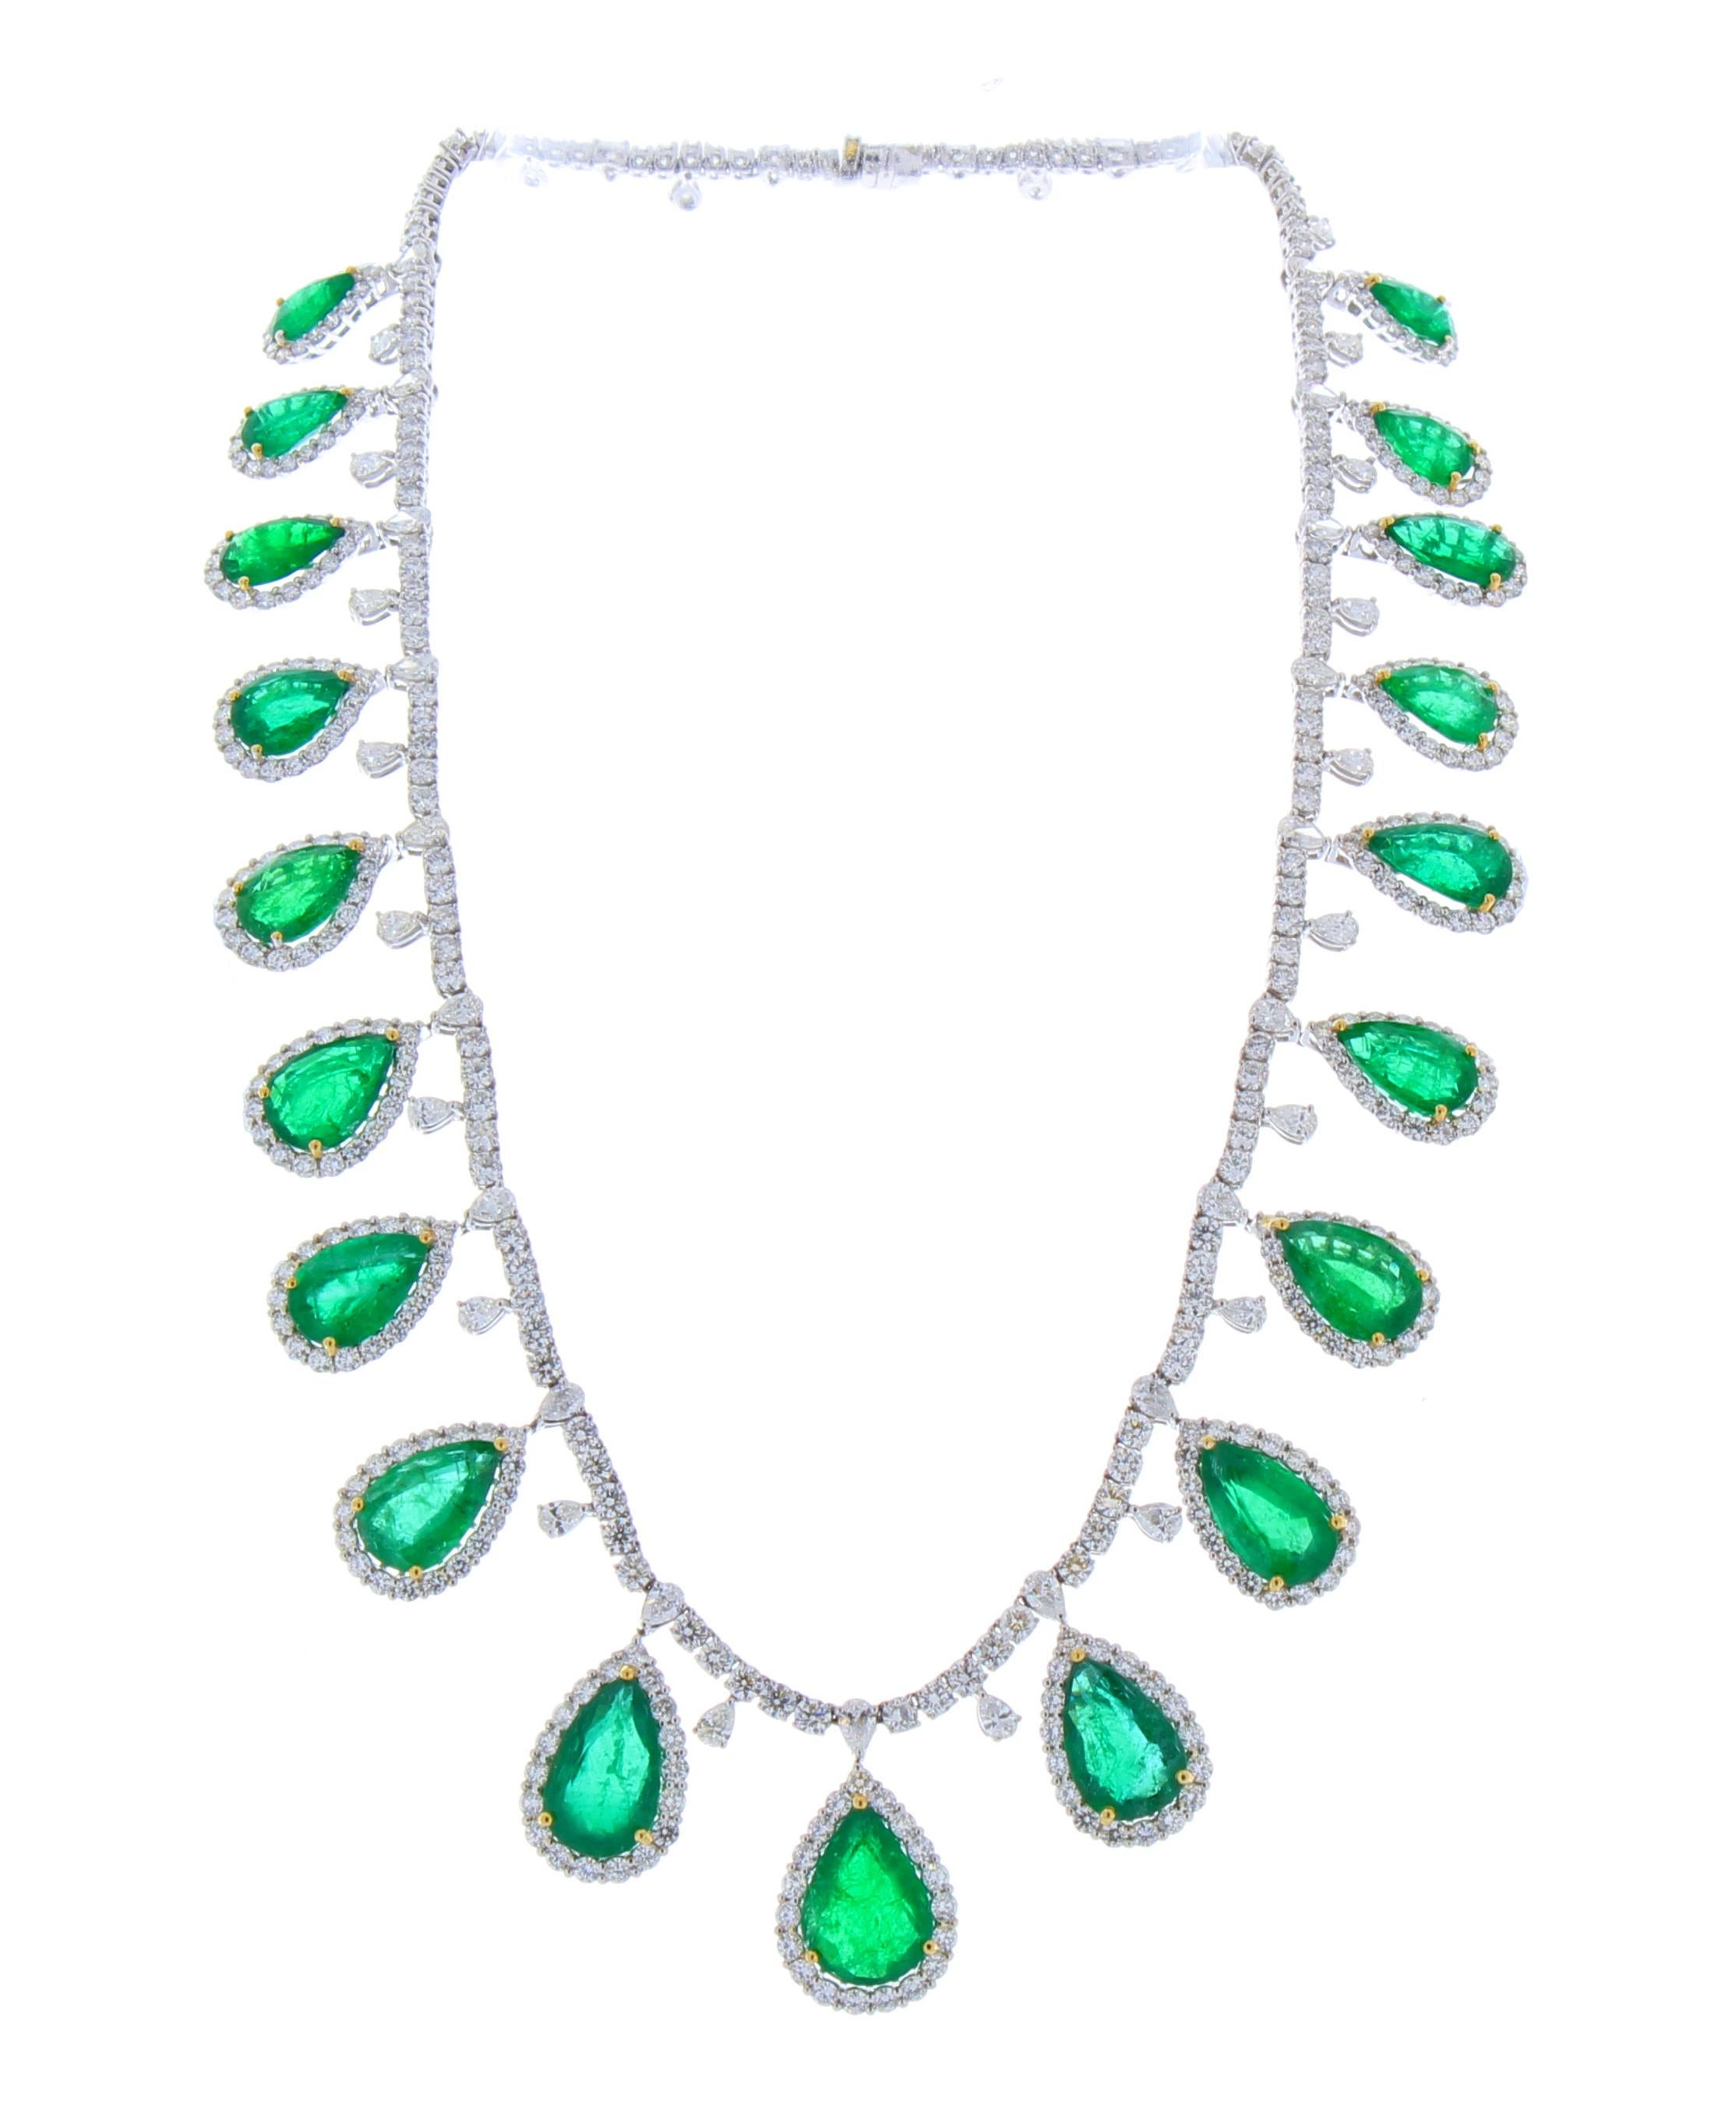 50.34 Carat Total Pear Shaped Emerald and Diamond Necklace in 18 Karat Gold im Zustand „Neu“ in Chicago, IL